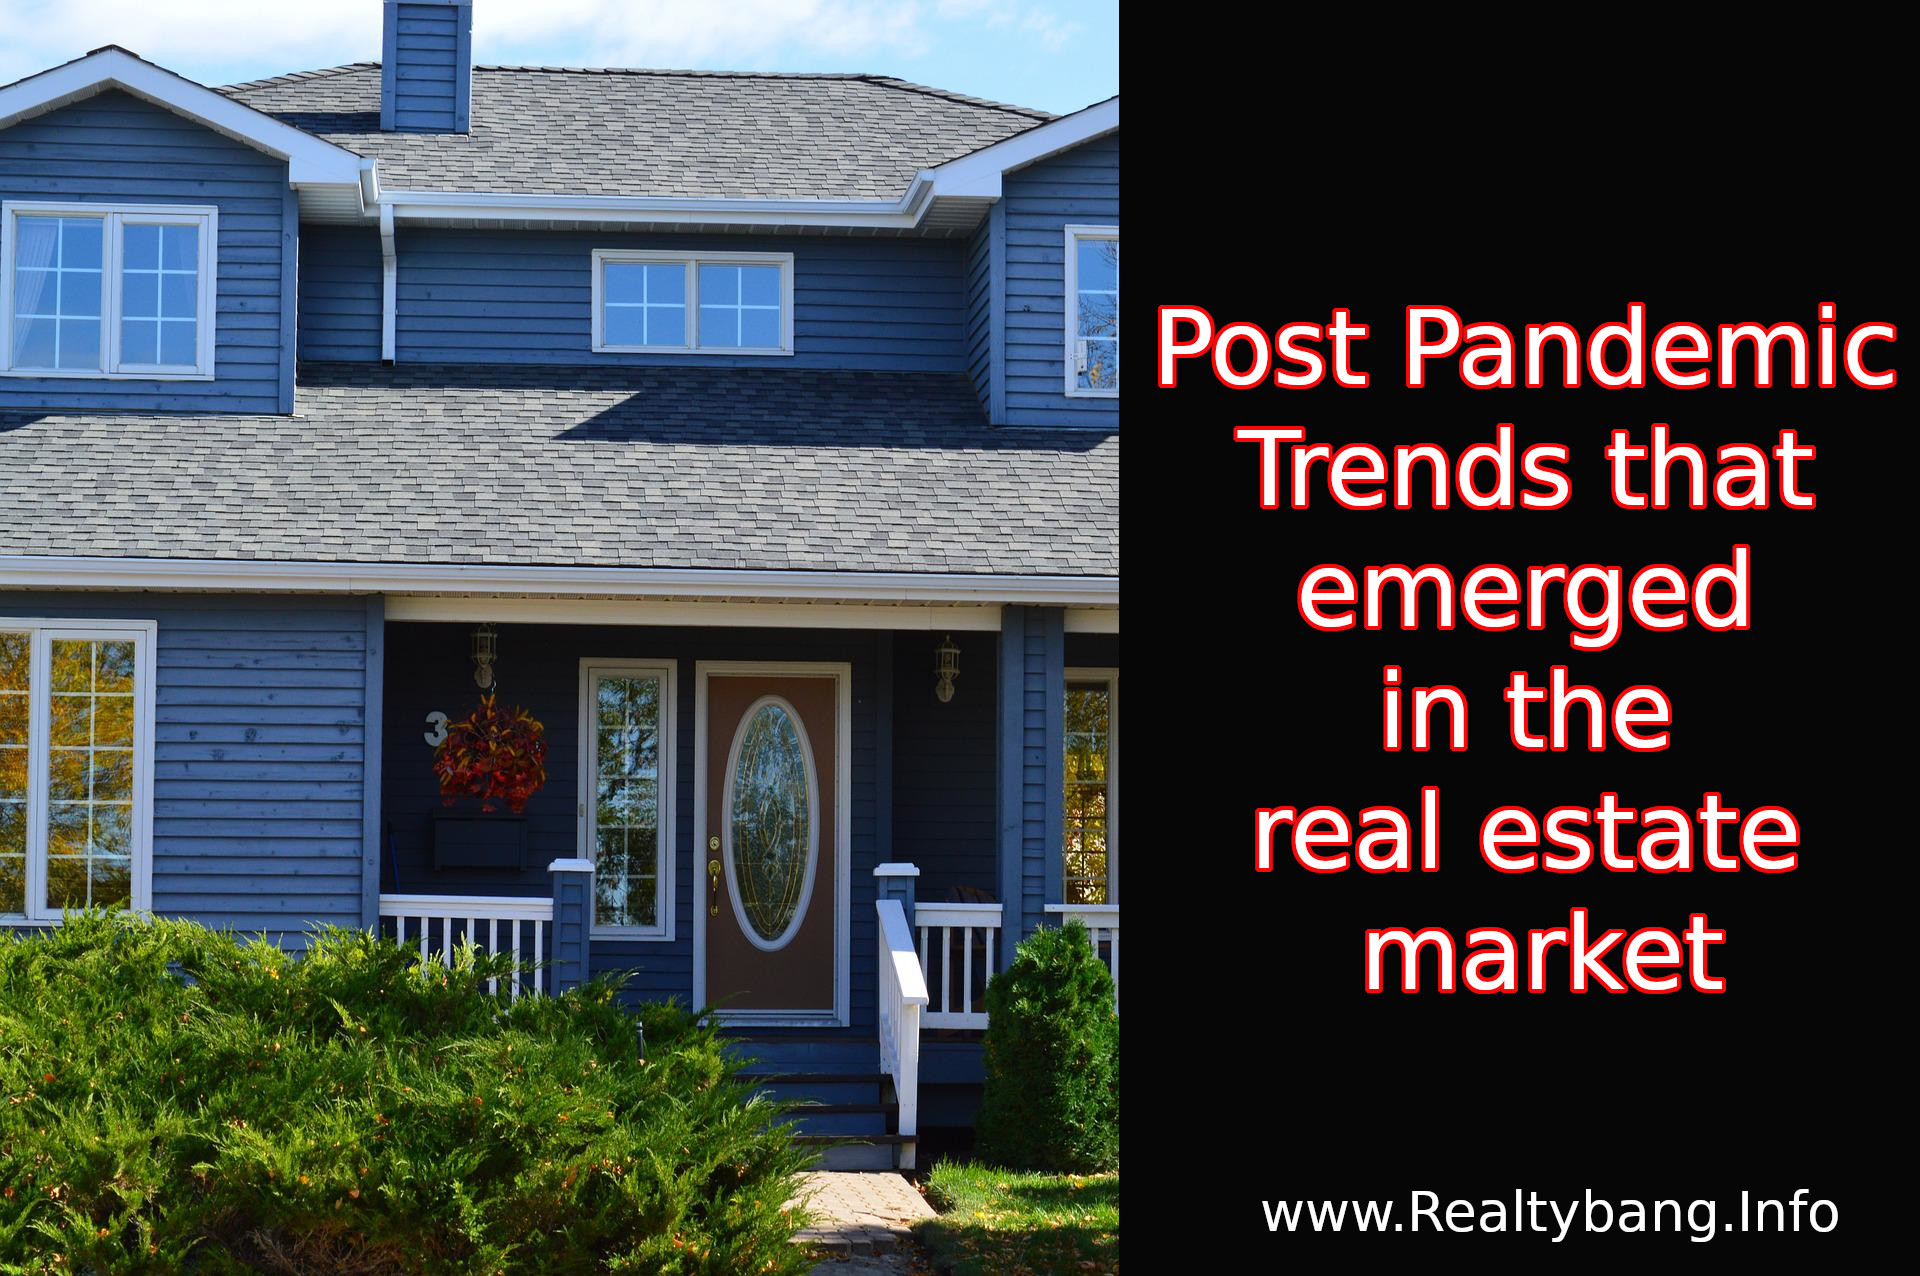 Post Pandemic Trends that emerged in the real estate market